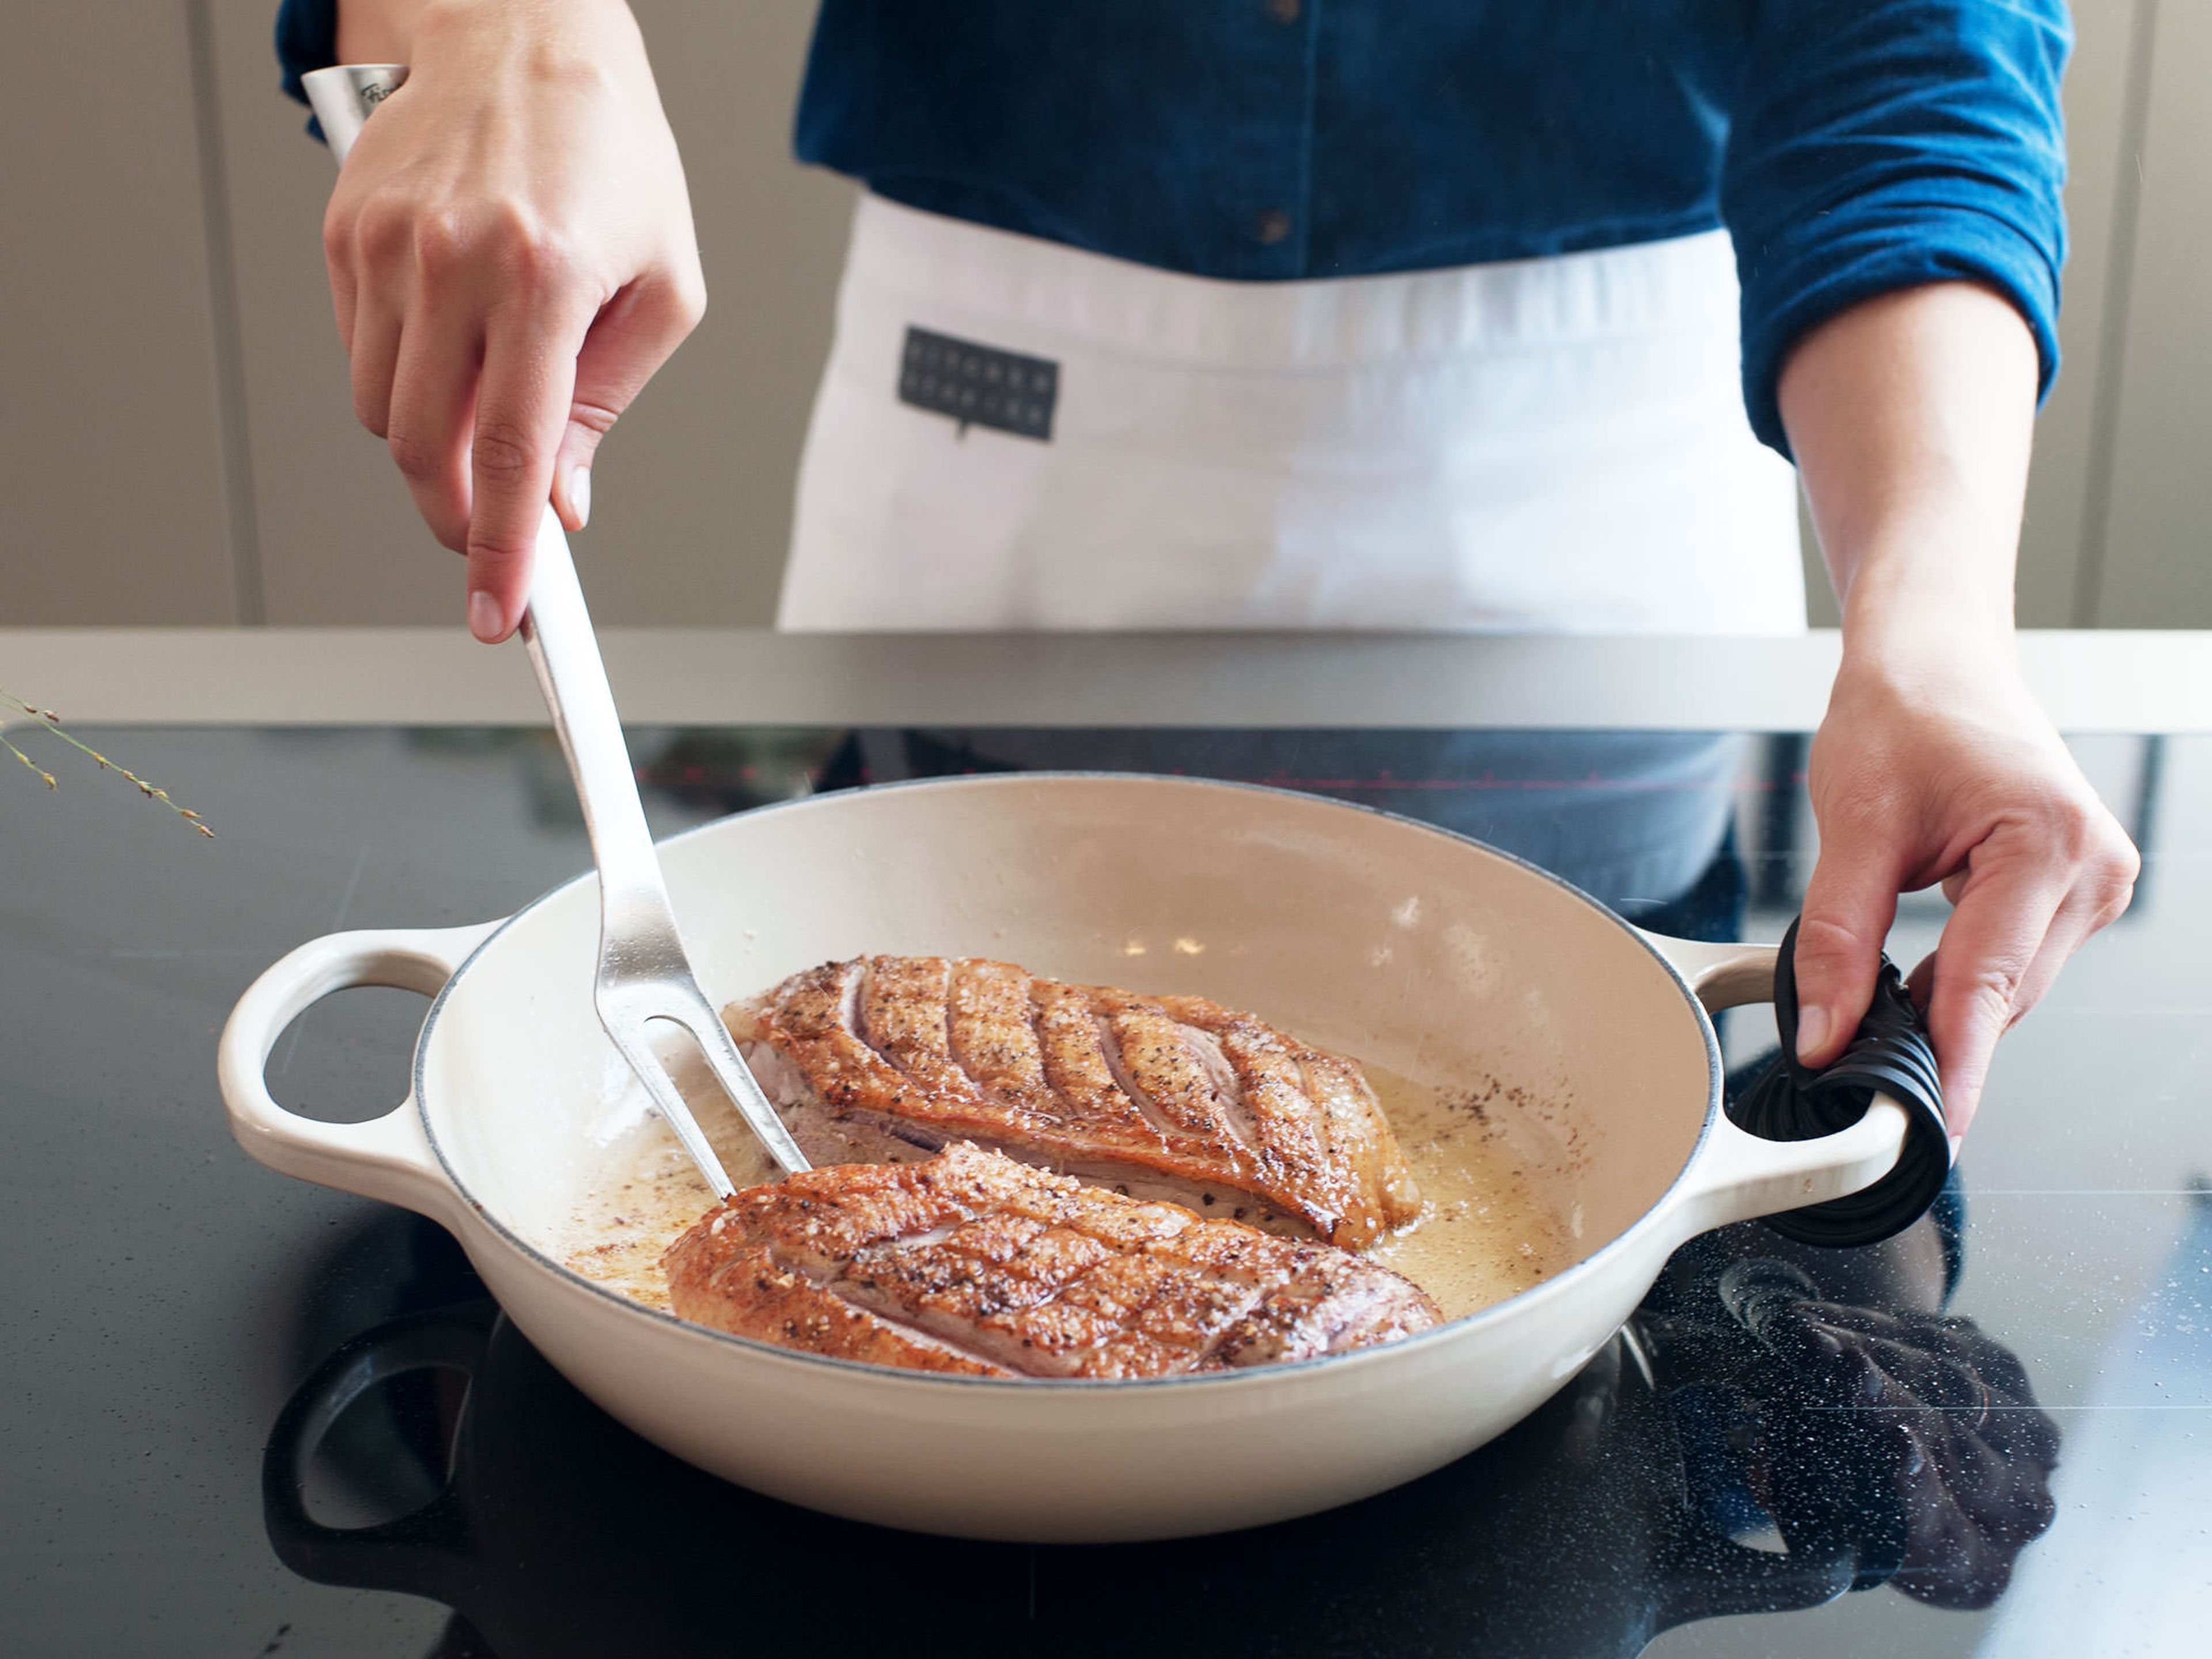 Heat a heavy-bottomed frying pan over medium-high heat. Add duck to pan, skin side-down, and cook until skin is browned and crisp, approx. 5 min. Reduce heat to medium, flip duck breasts, and cook until browned and cooked through, approx. 5 – 8 min.